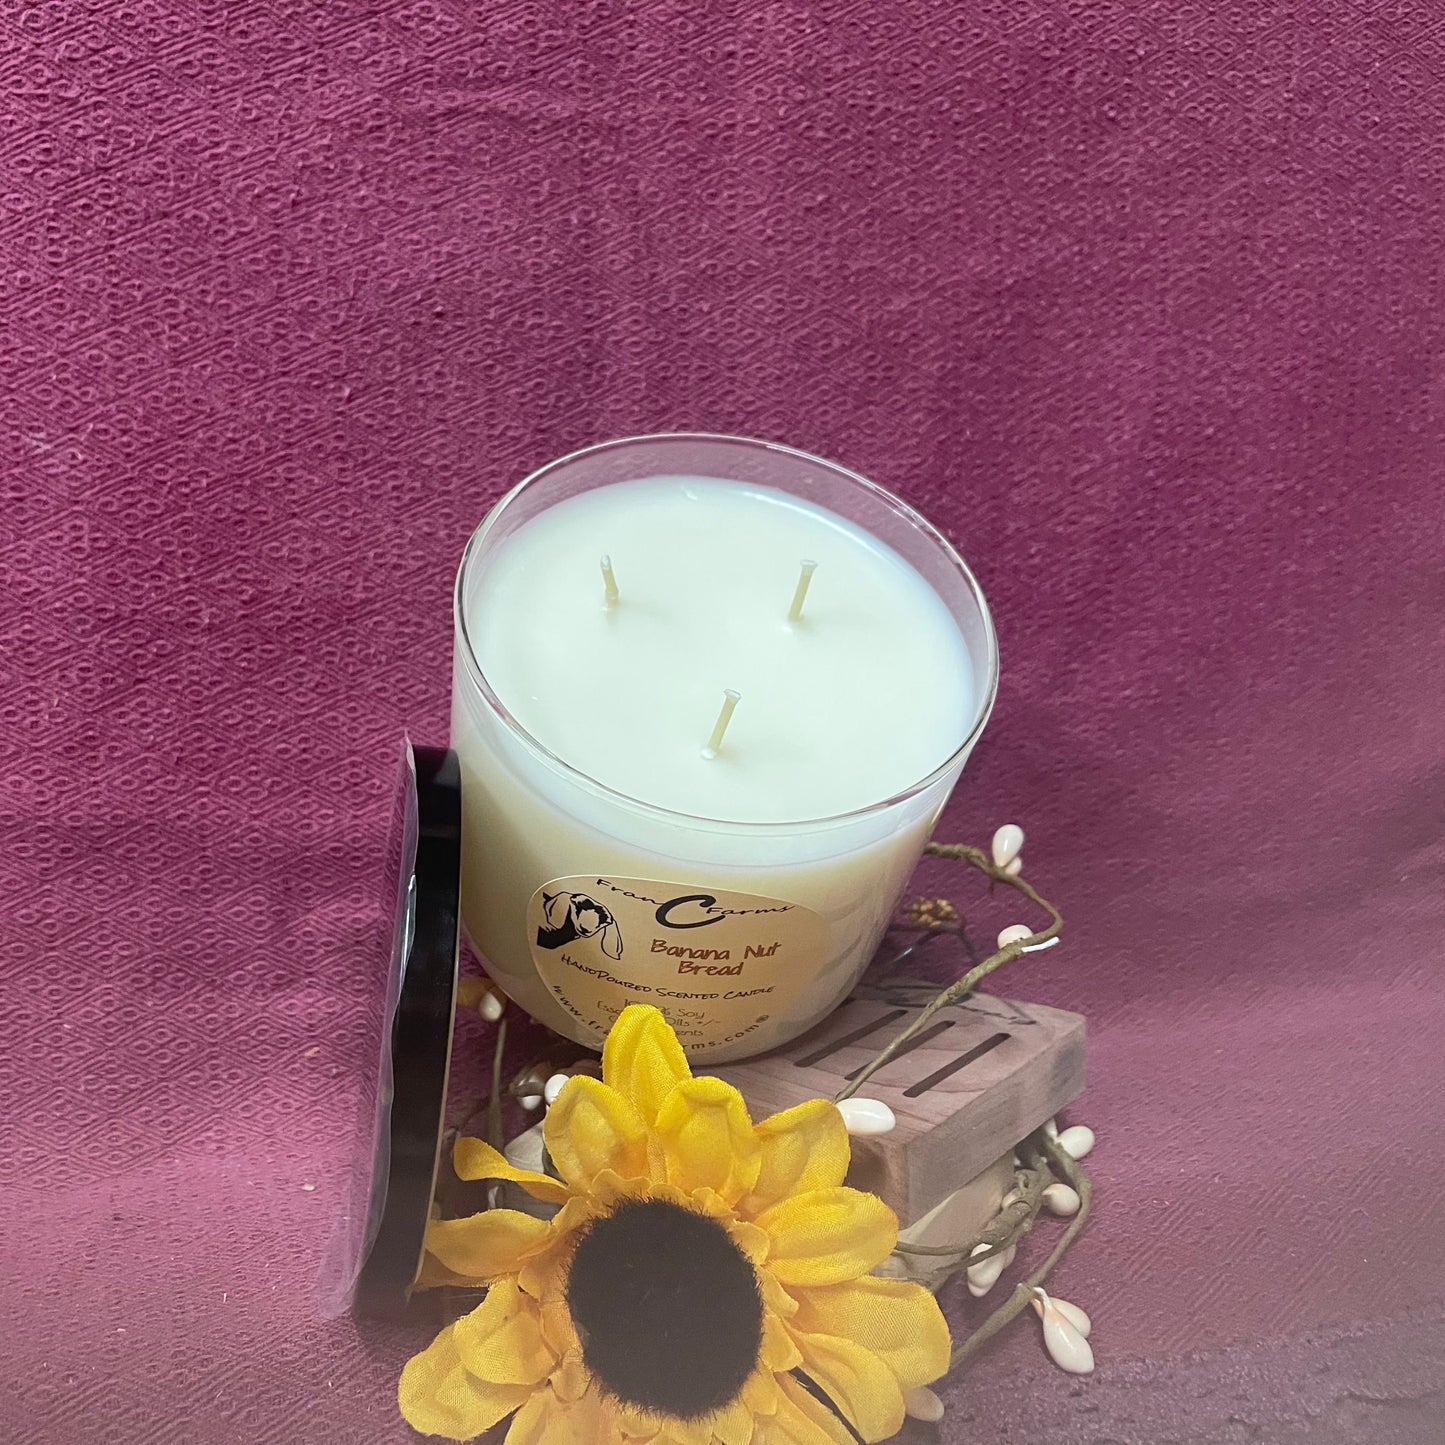 Banana Nut Bread 3-Wick Candle